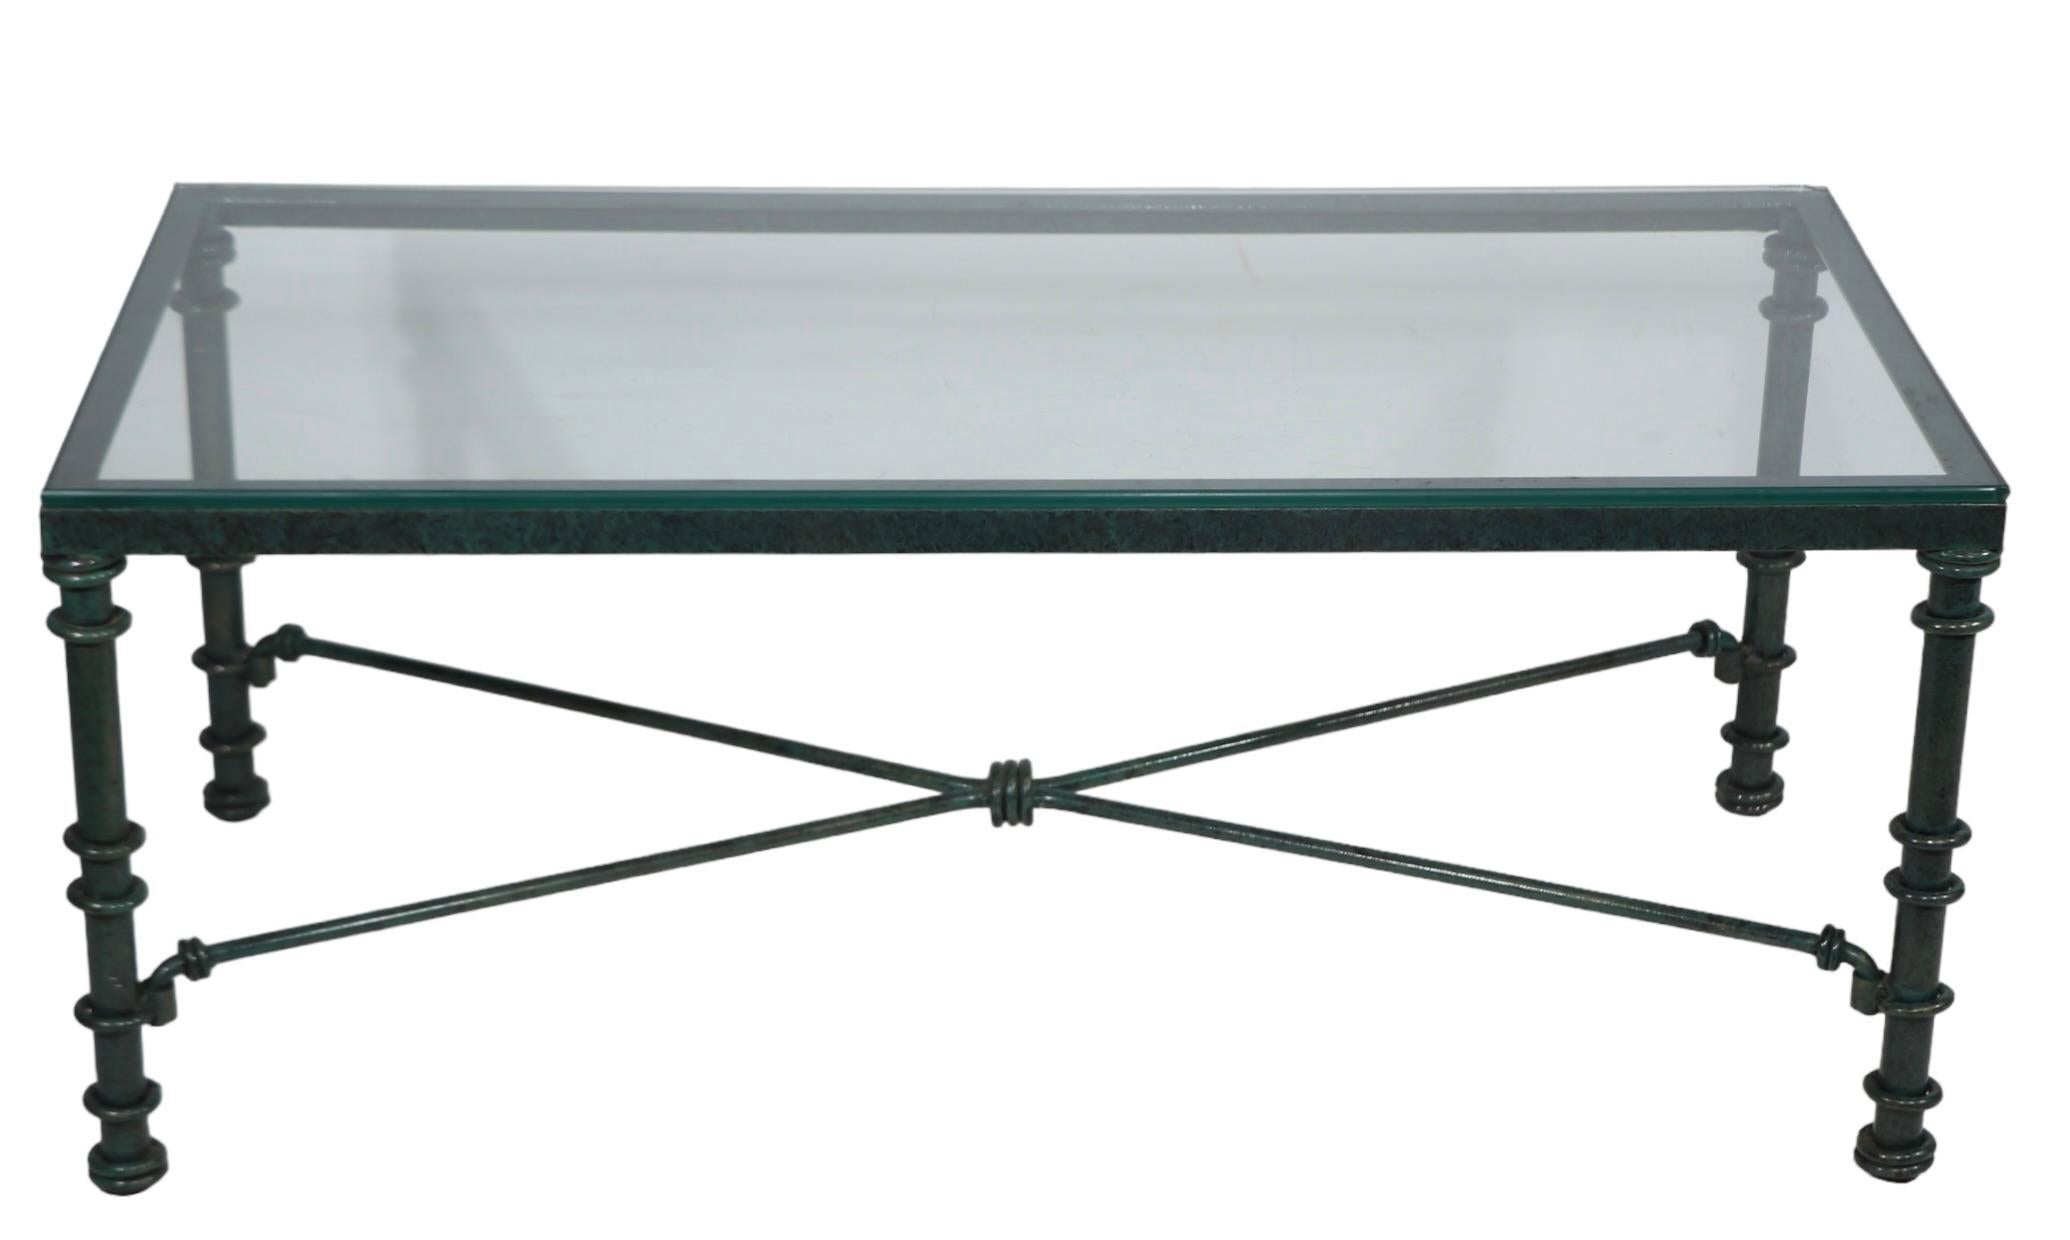 Metal Brutalist Faux Verdigris Finish Glass Top Coffee Table c. 1970/1980's For Sale